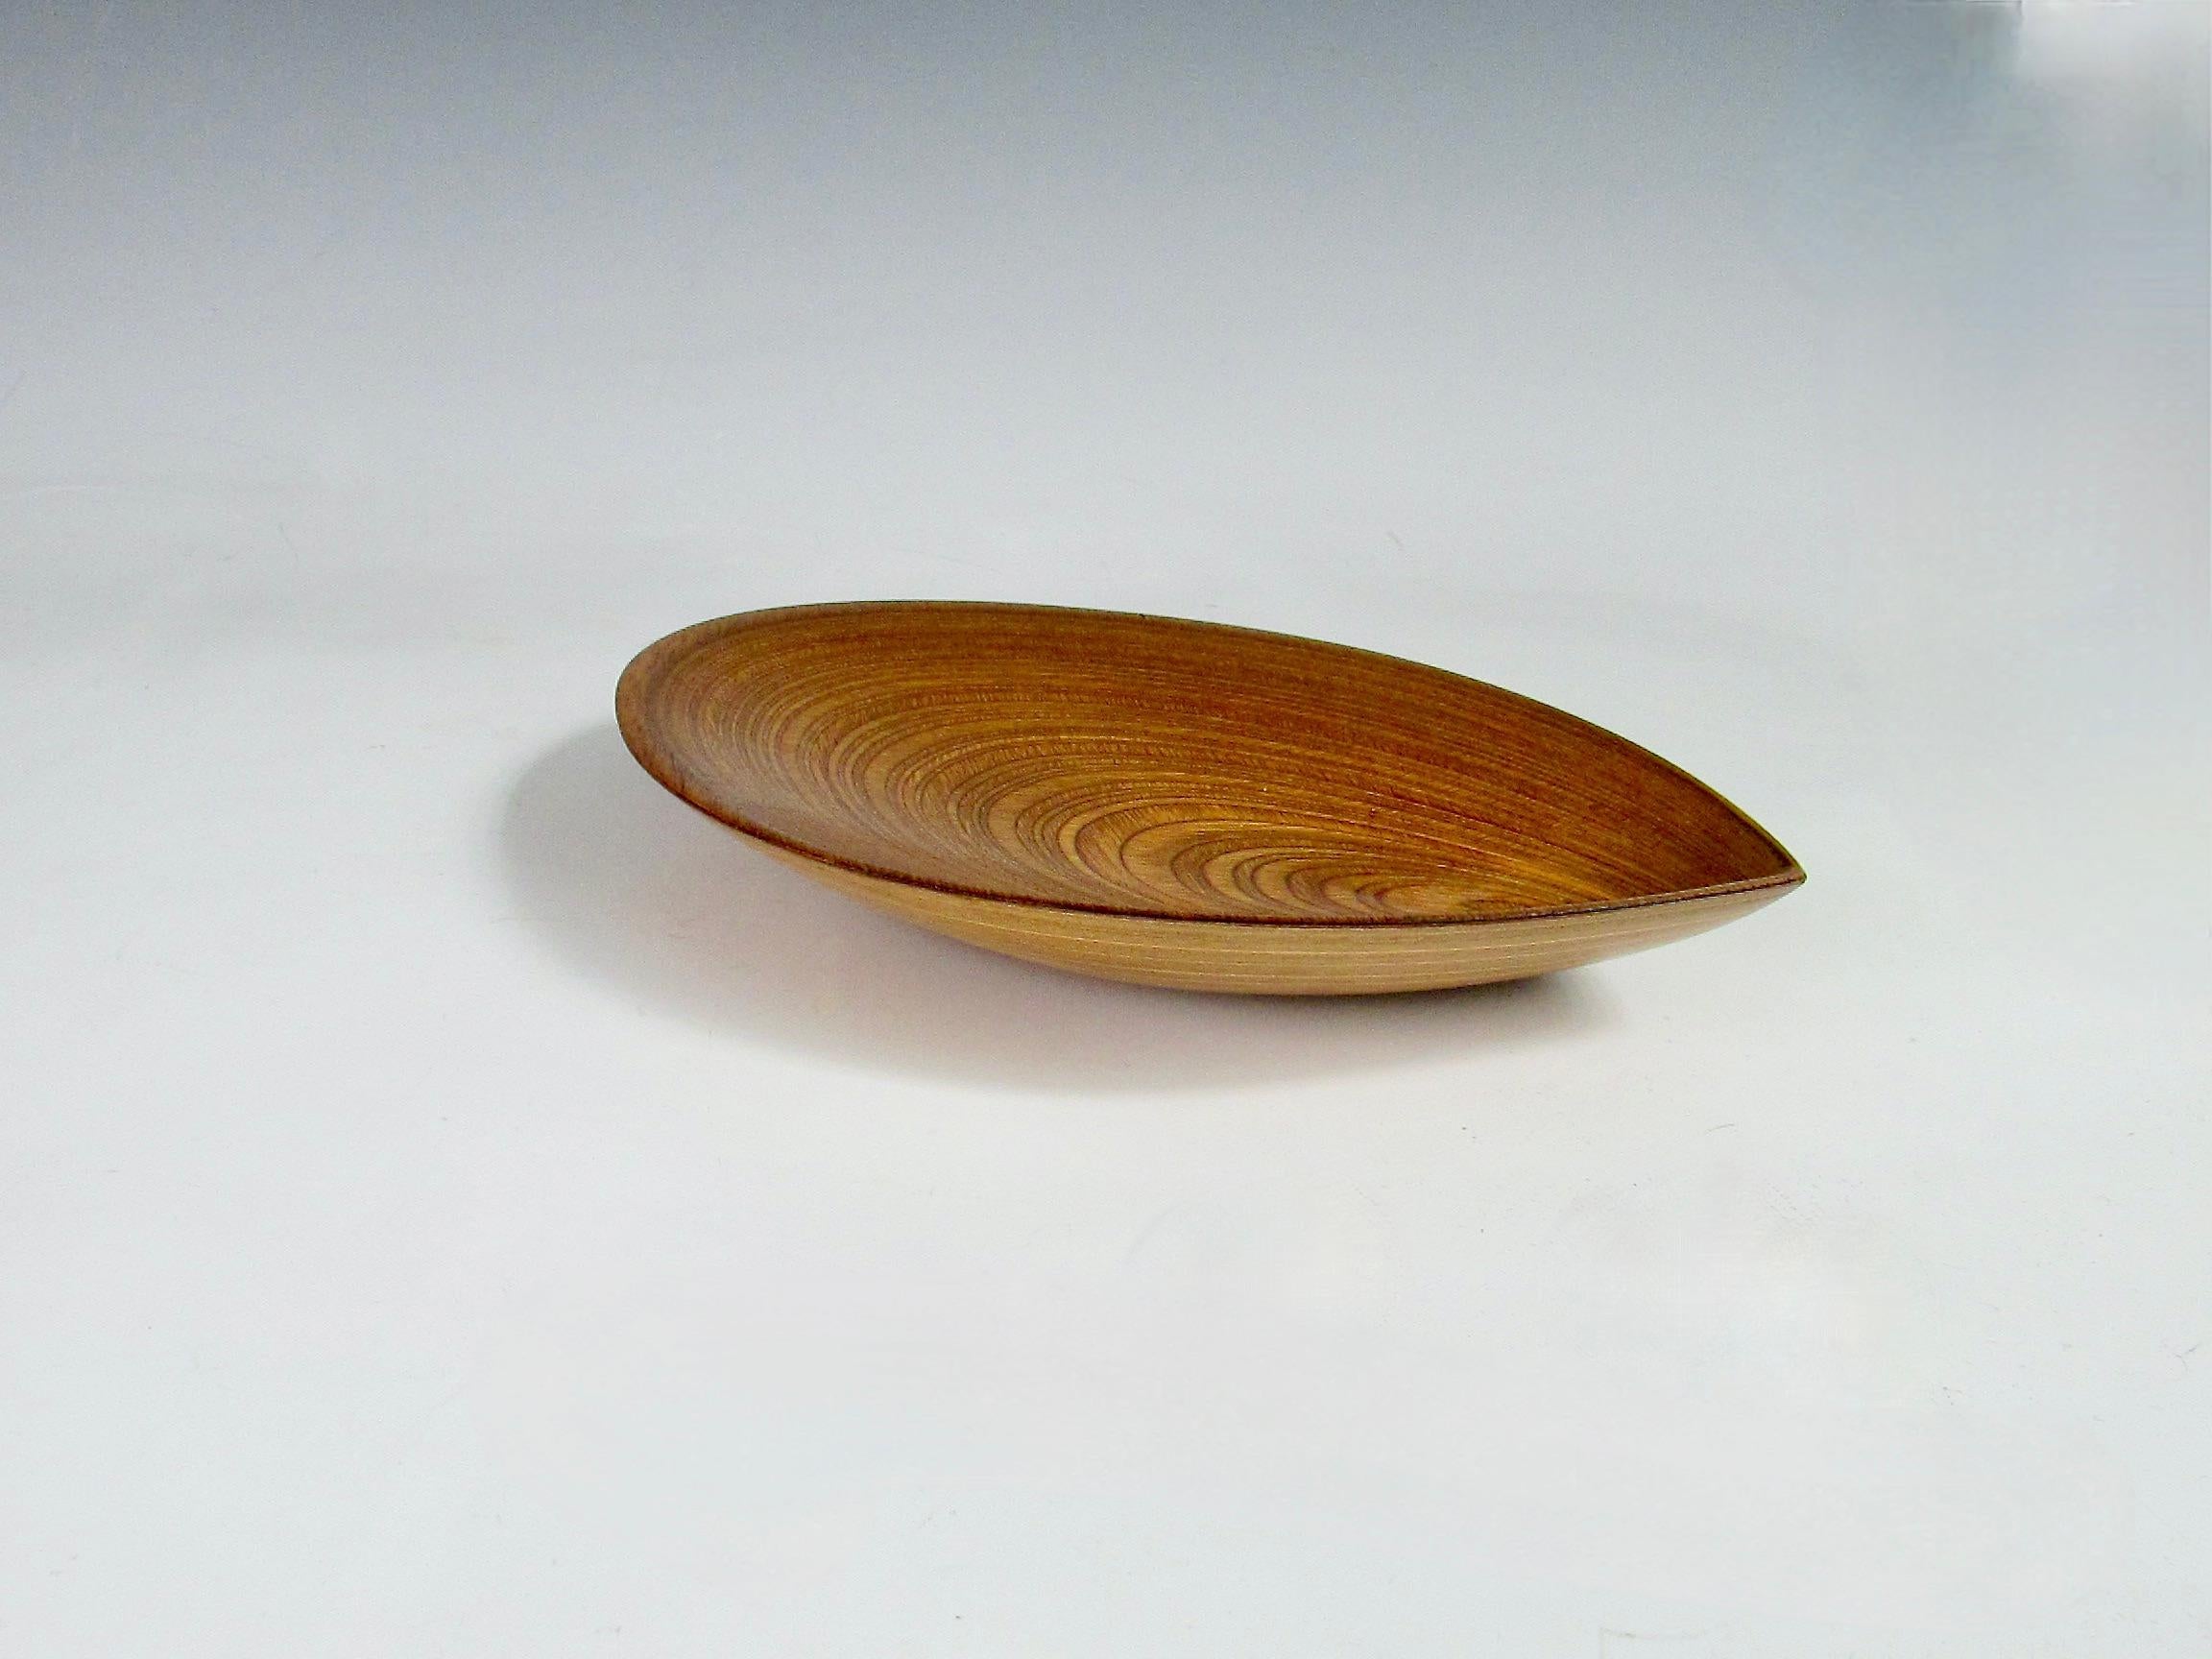 Iconic and rare Tapio Wirkkala rythmic aeroplan / plywood range leaf tray awarded as most beautiful object of the world at the triennale IX in 1951 and received the gold medal. Produced by Soinne et Kni. Finland . Carvede signature on underside